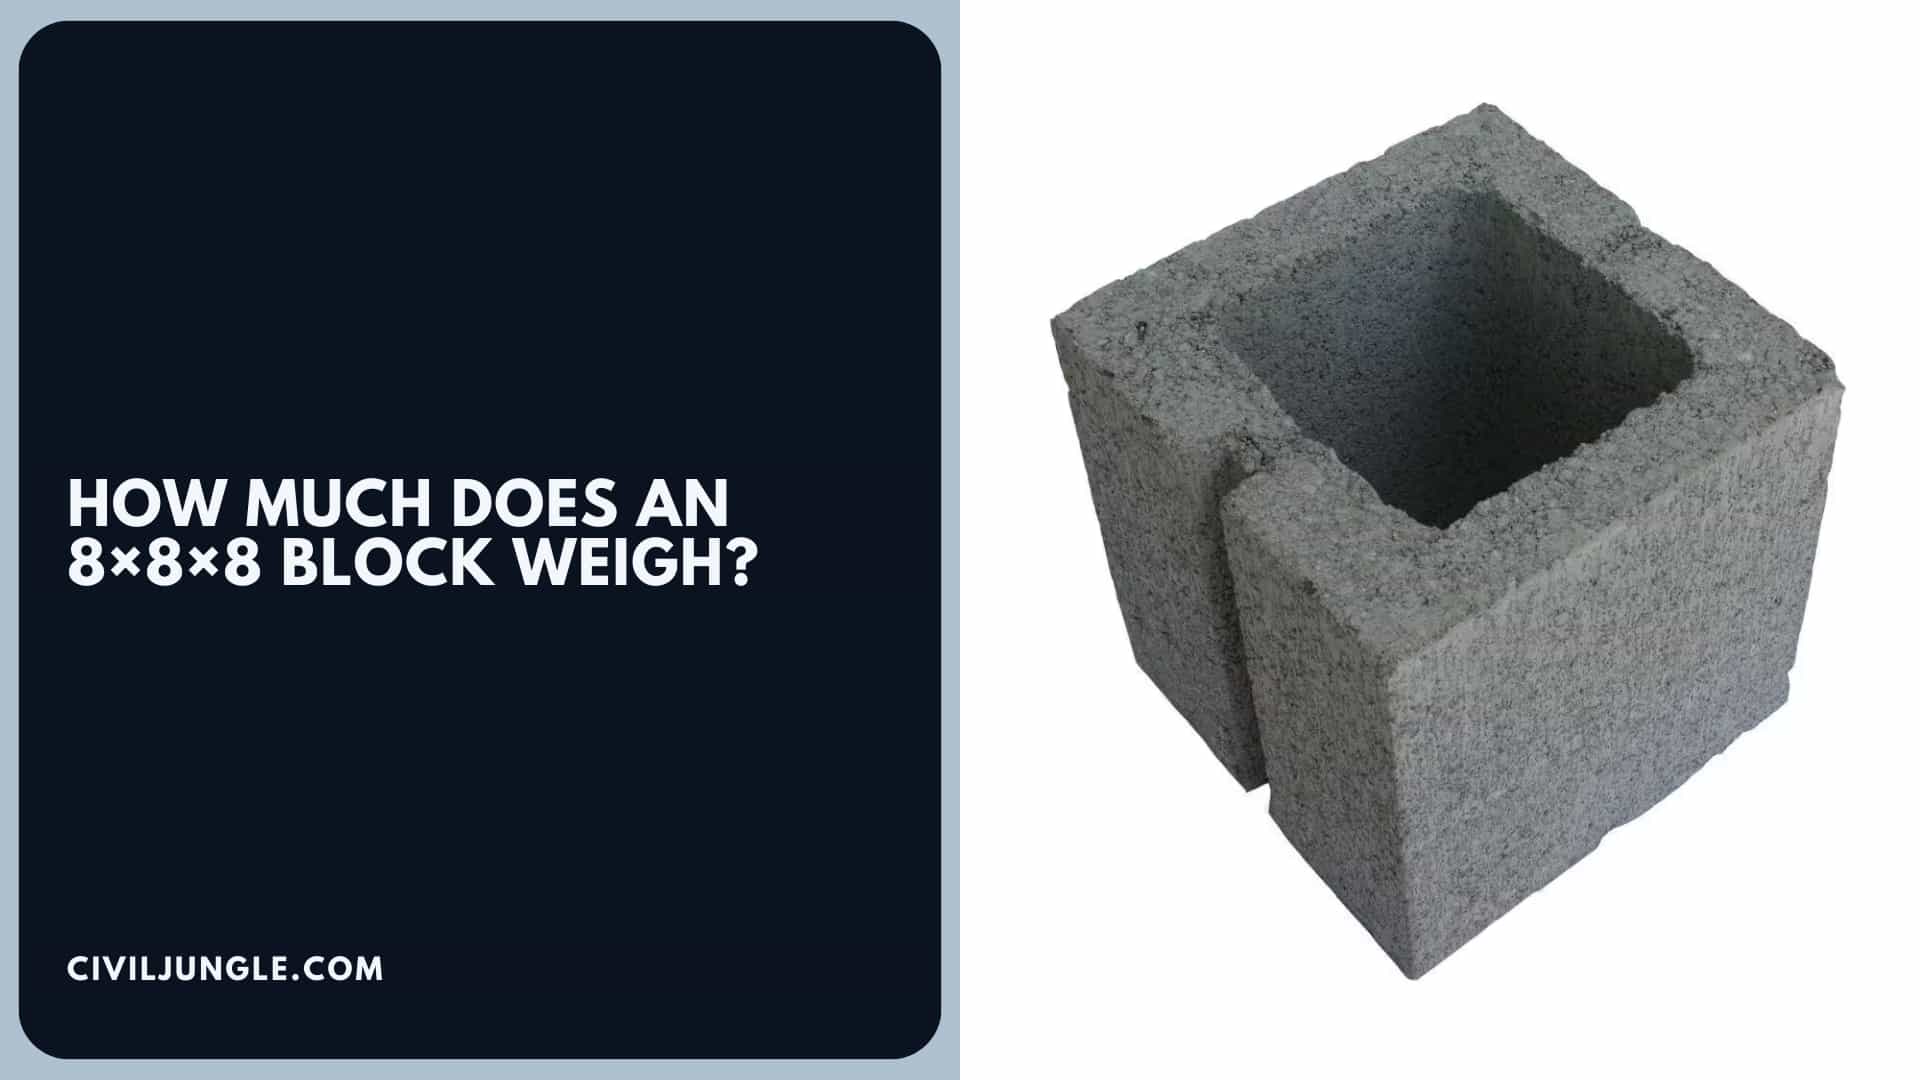 How Much Does an 8×8×8 Block Weigh?